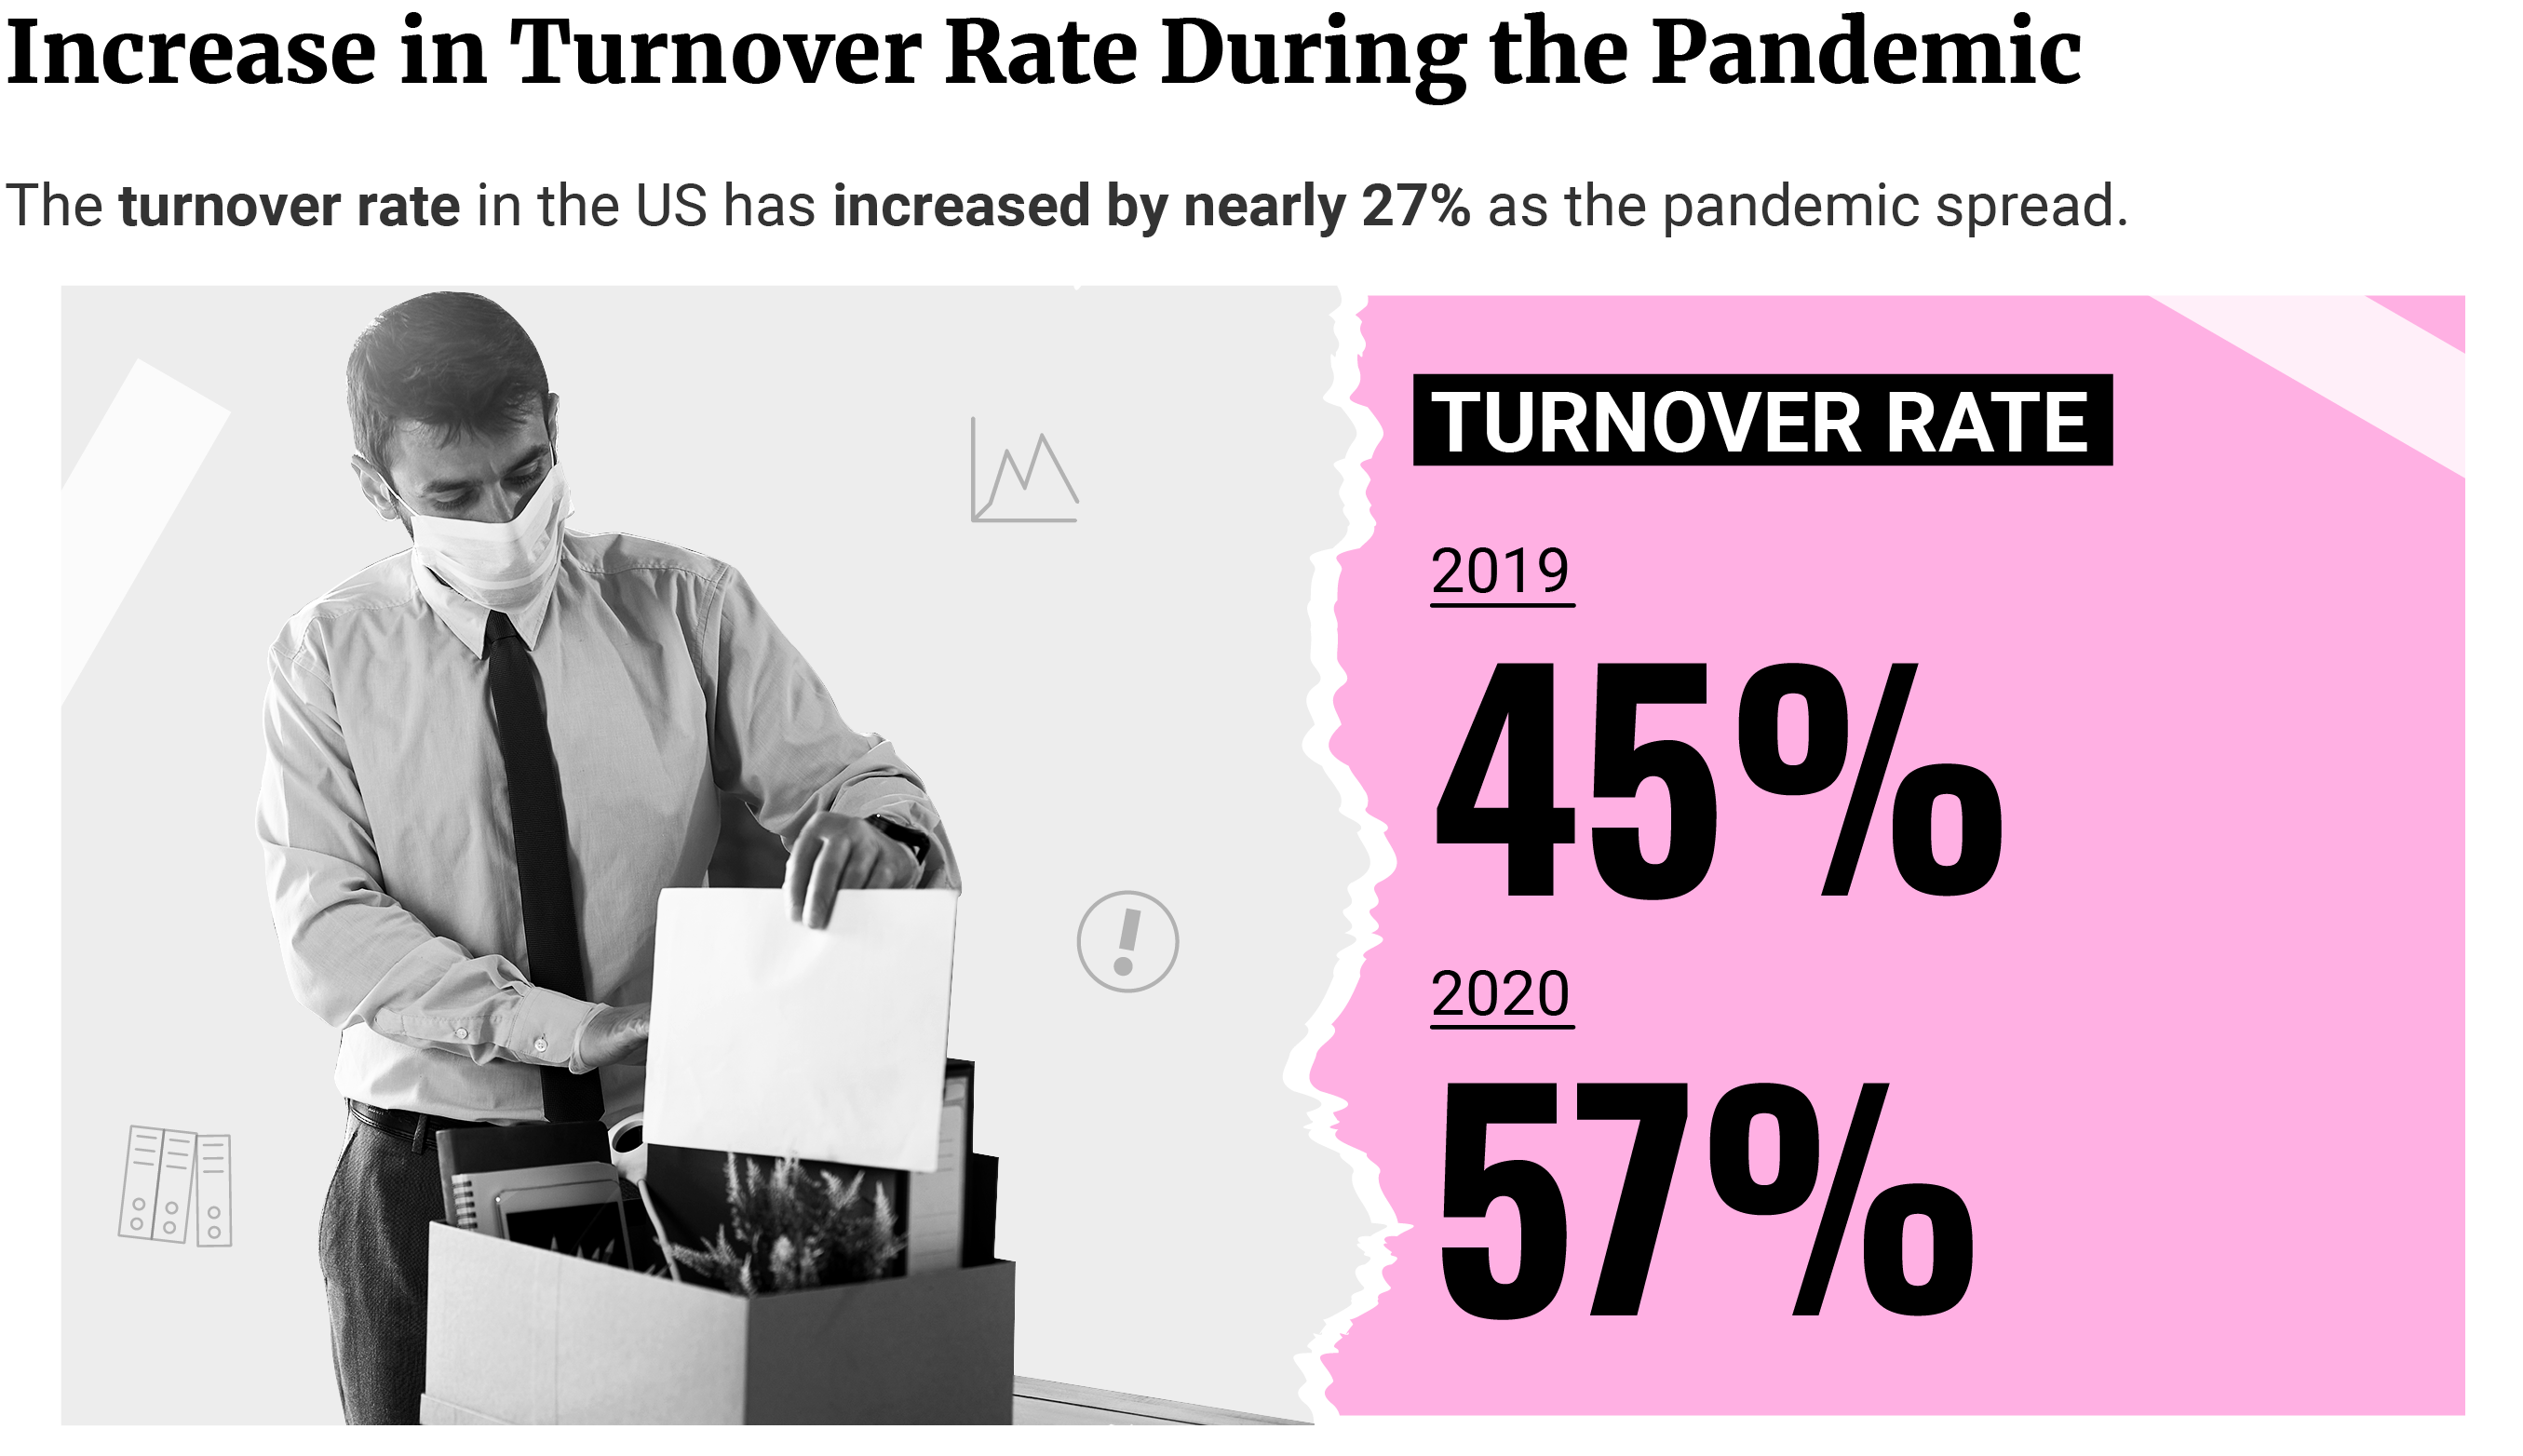 Call out text box showing the turnover rates from 2019 to 2020.